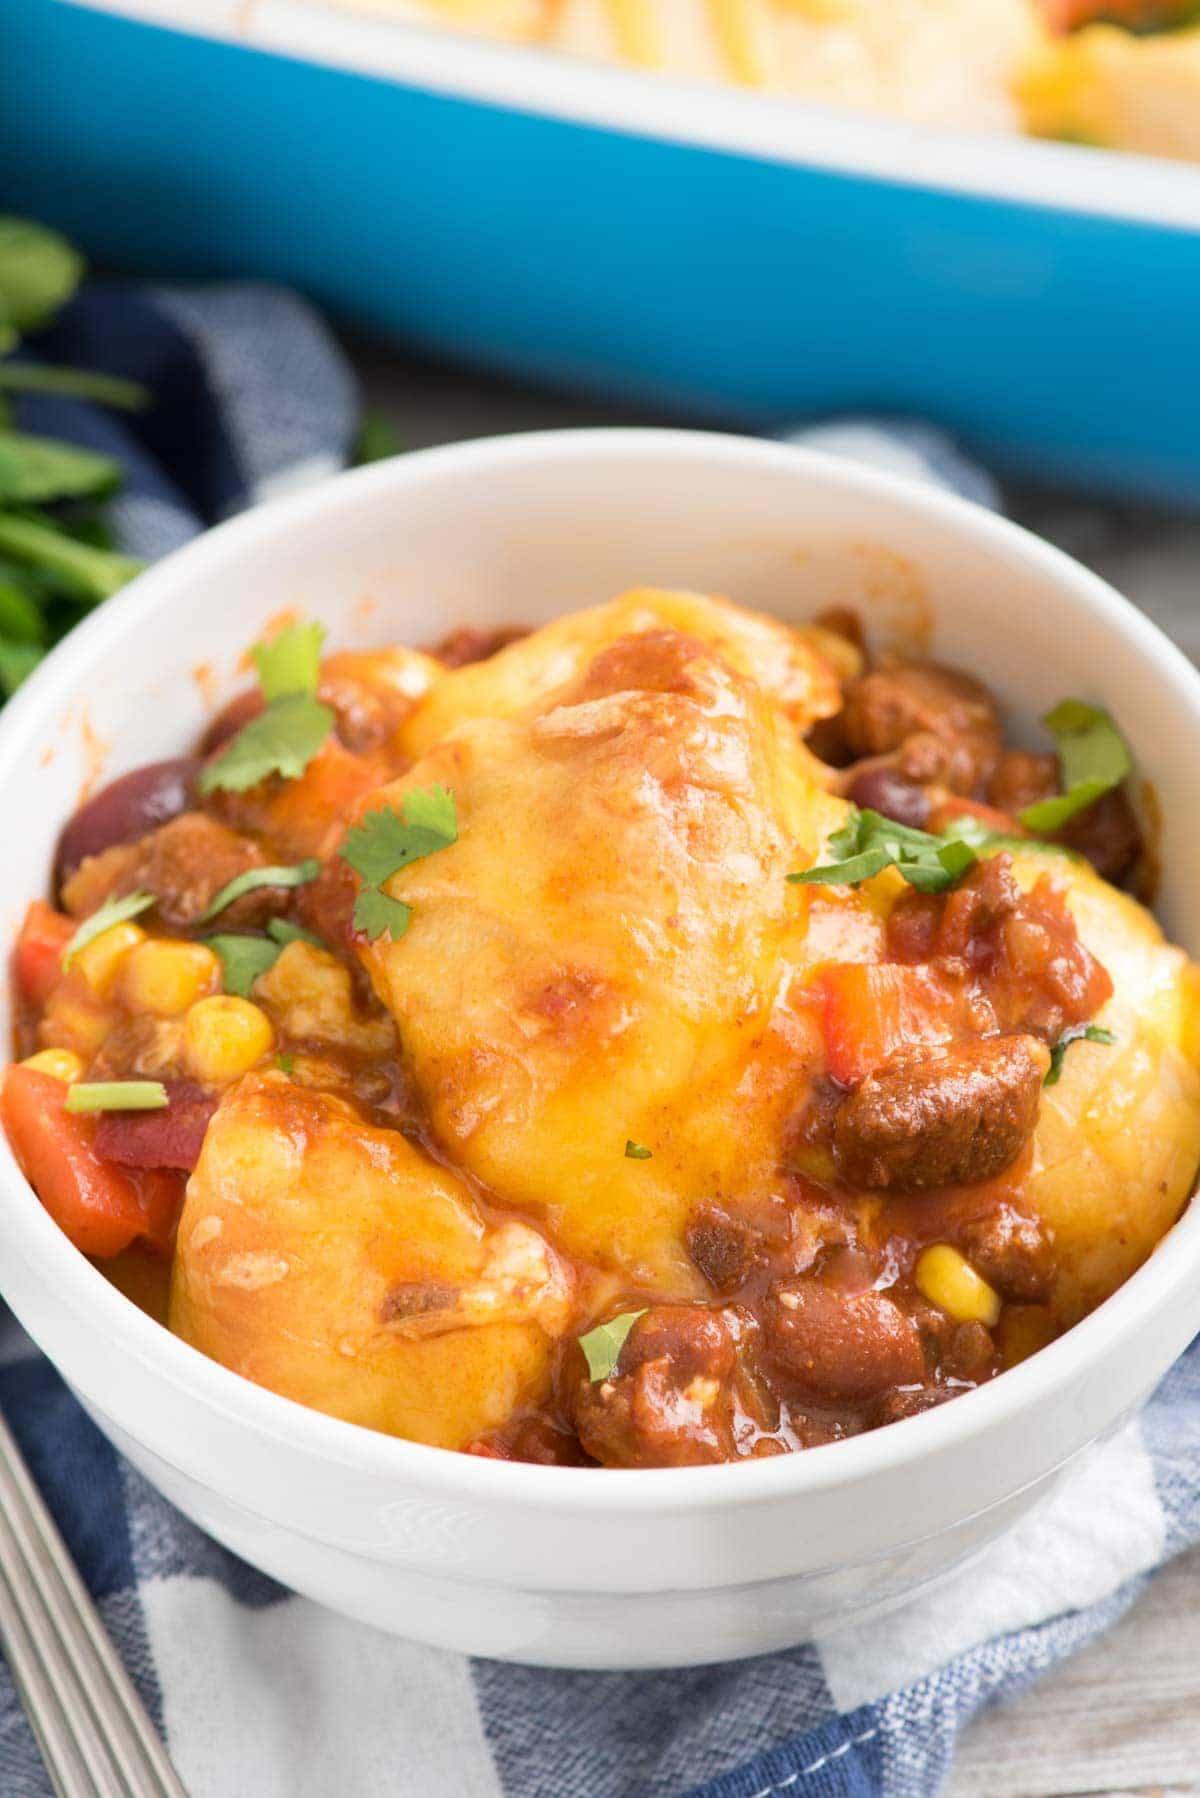 Easy Cheesy Chili Biscuit Bakein a white bowl - this easy weeknight dinner recipe has just 5 ingredients! Chili is topped with vegetables, biscuits, and cheese then baked up for a delicious comfort food meal.